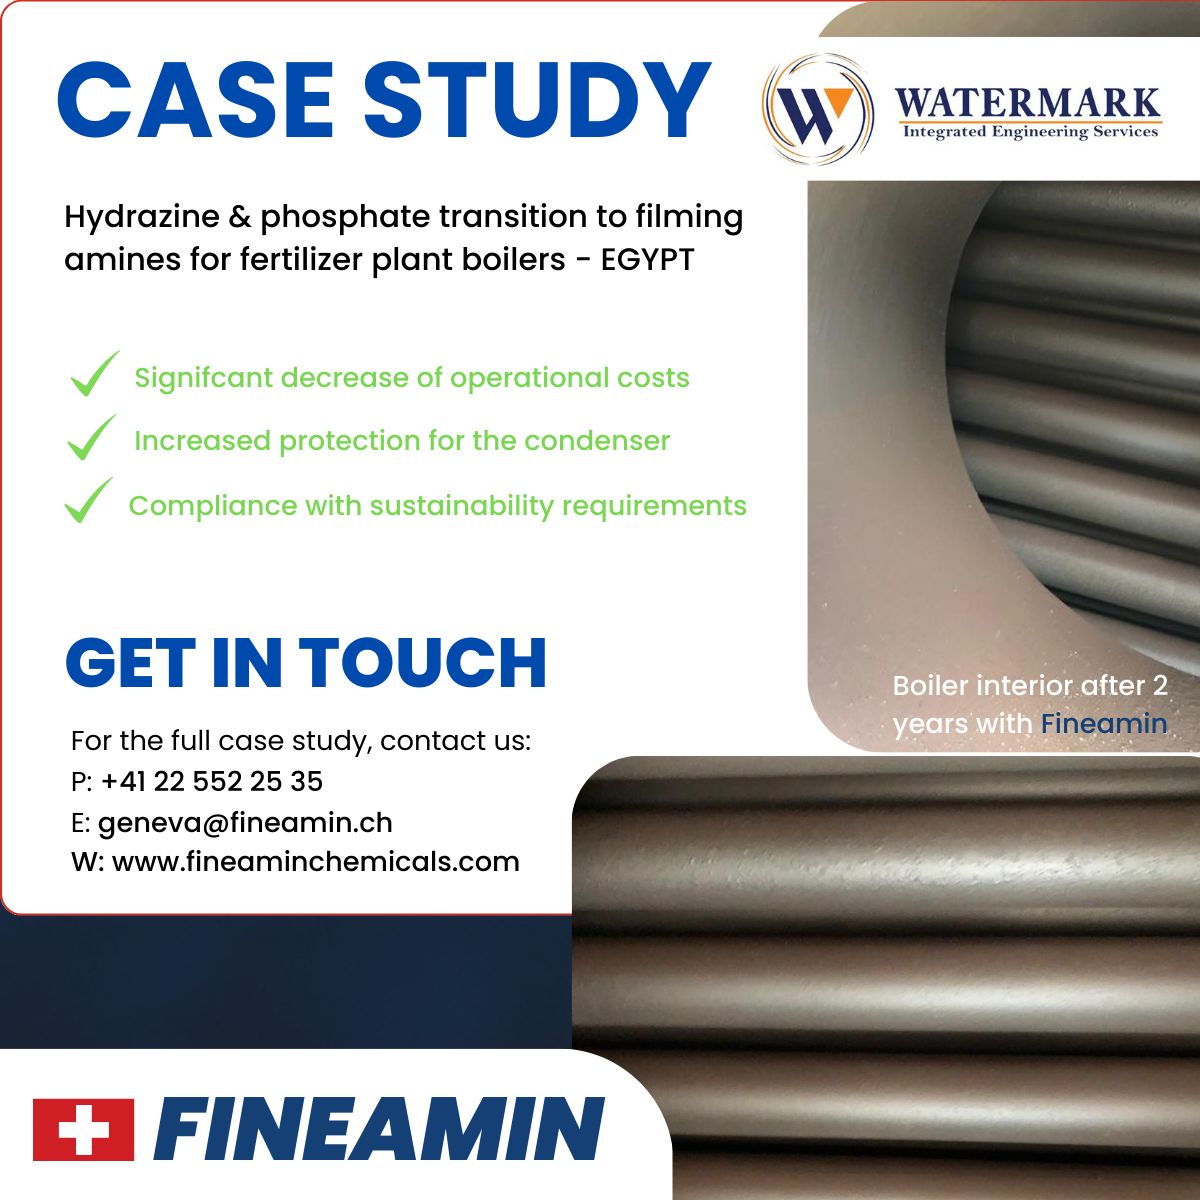 CASE STUDY - BOILER WATER TREATMENT | Hydrazine & phosphate transition to filming amines